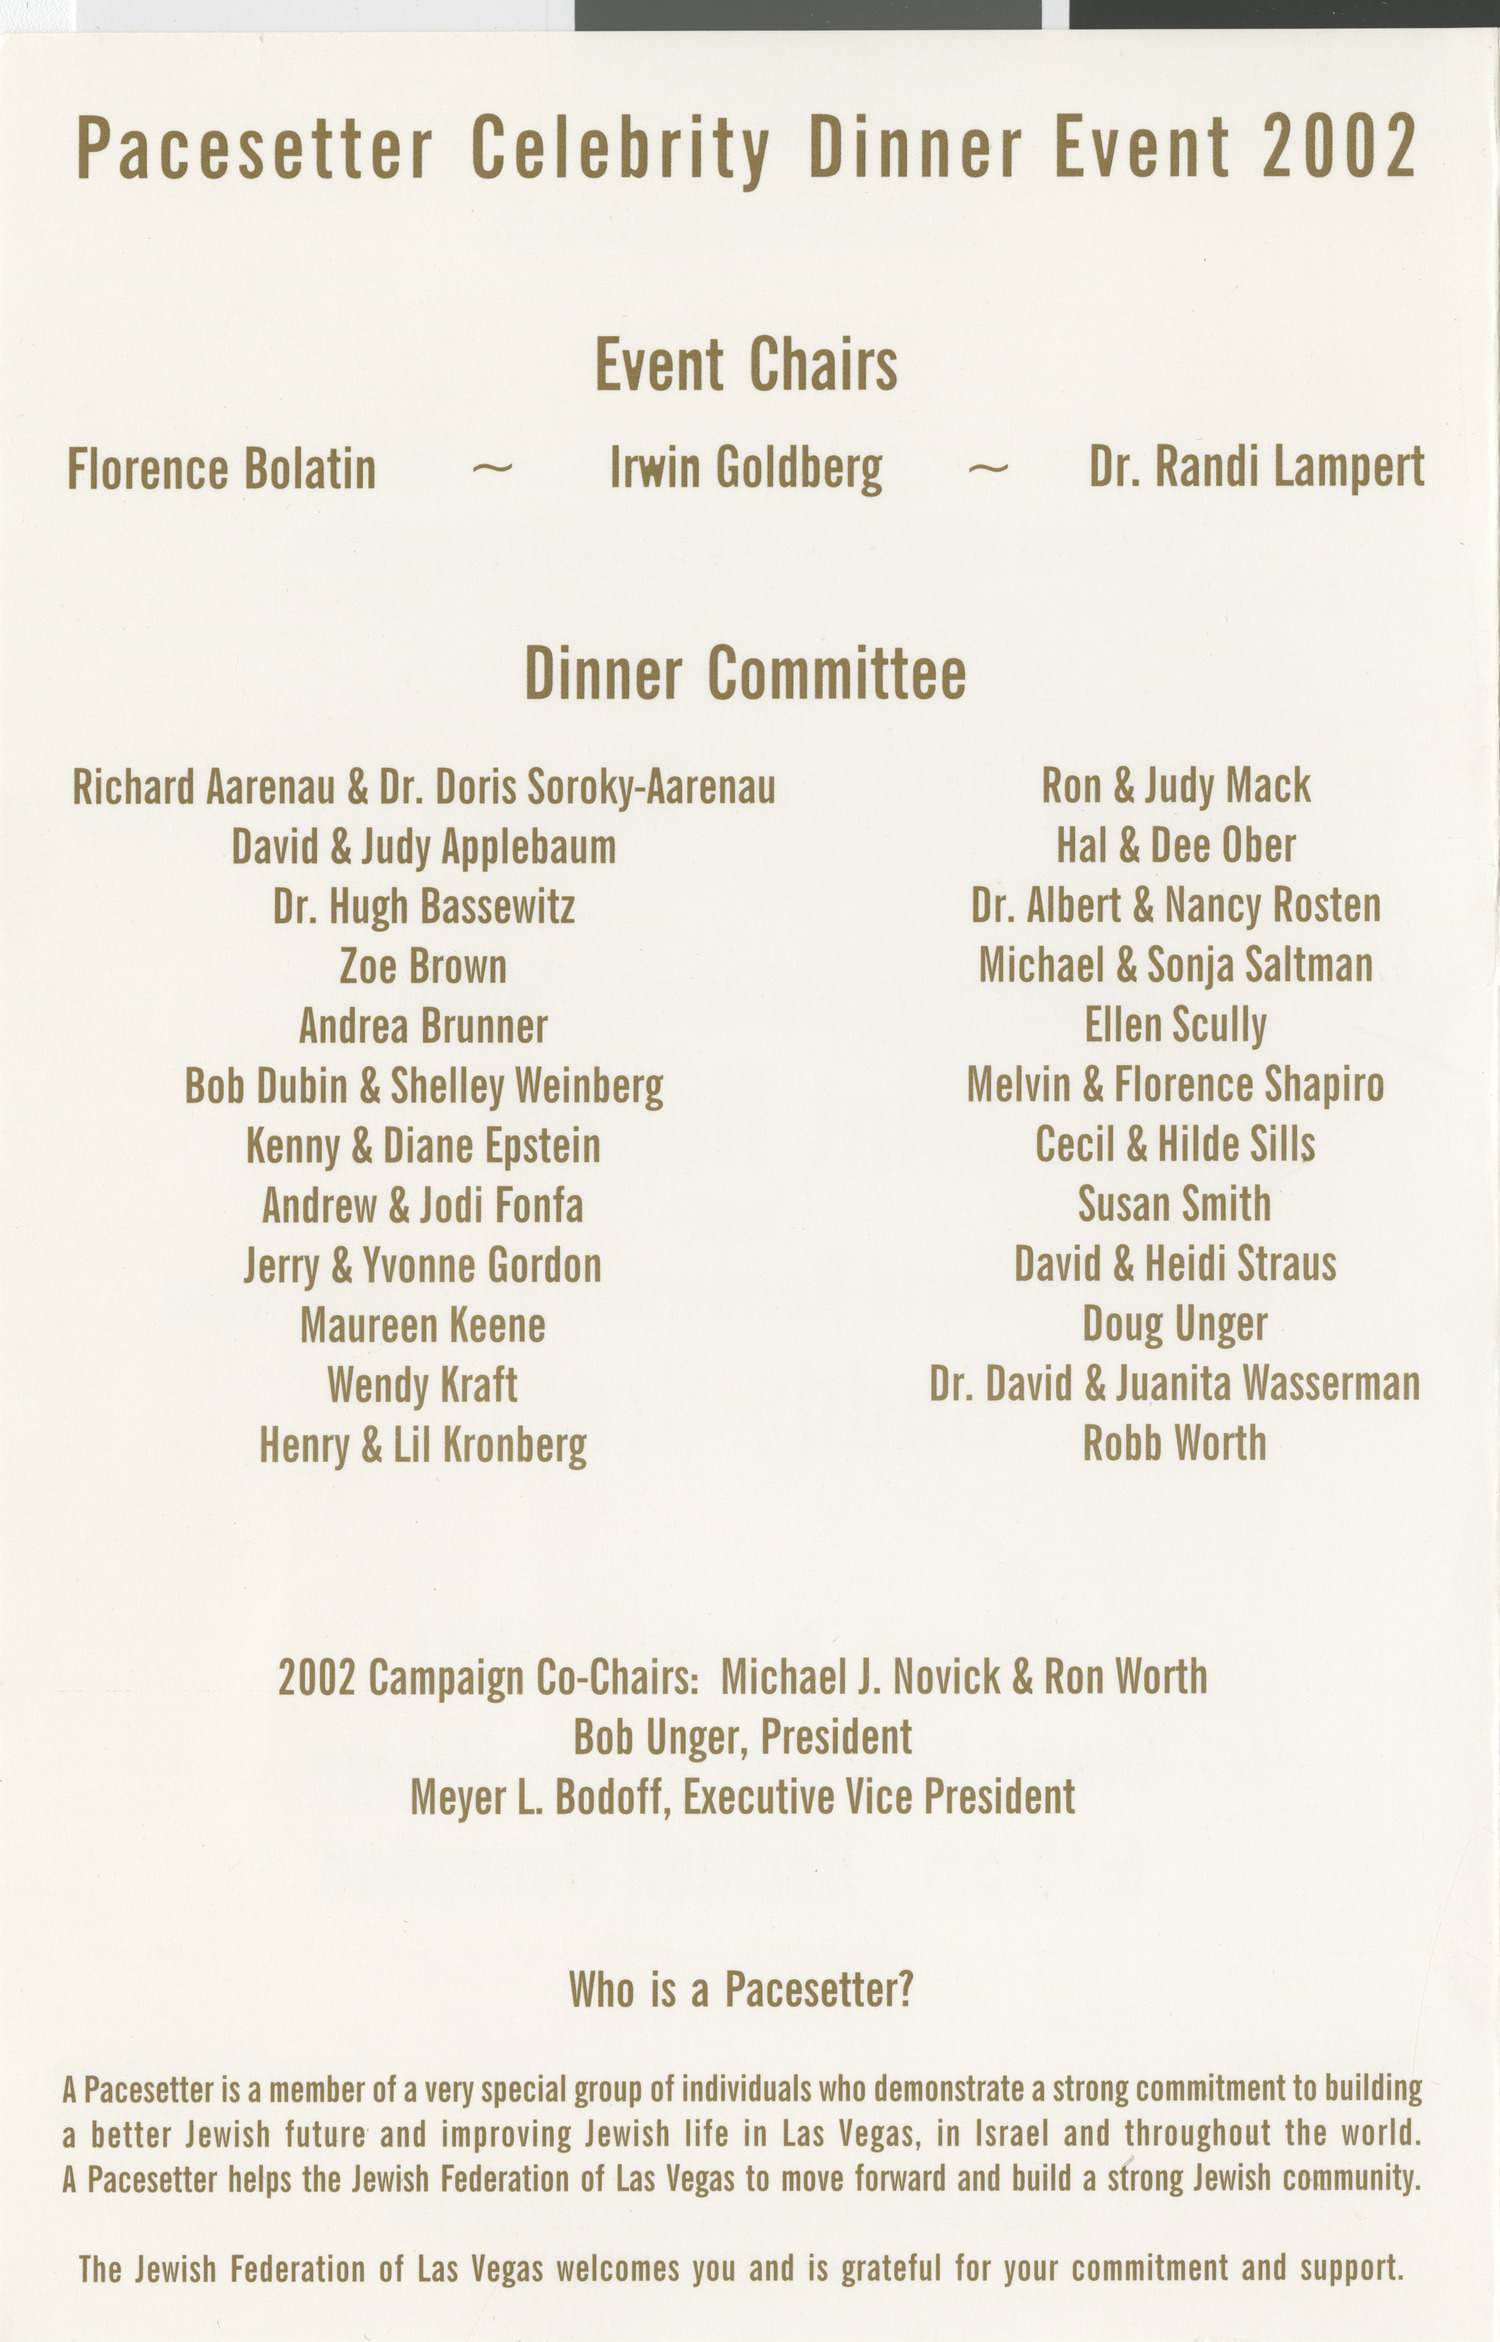 Program from Pacesetter Celebrity Dinner event, March 3, 2002